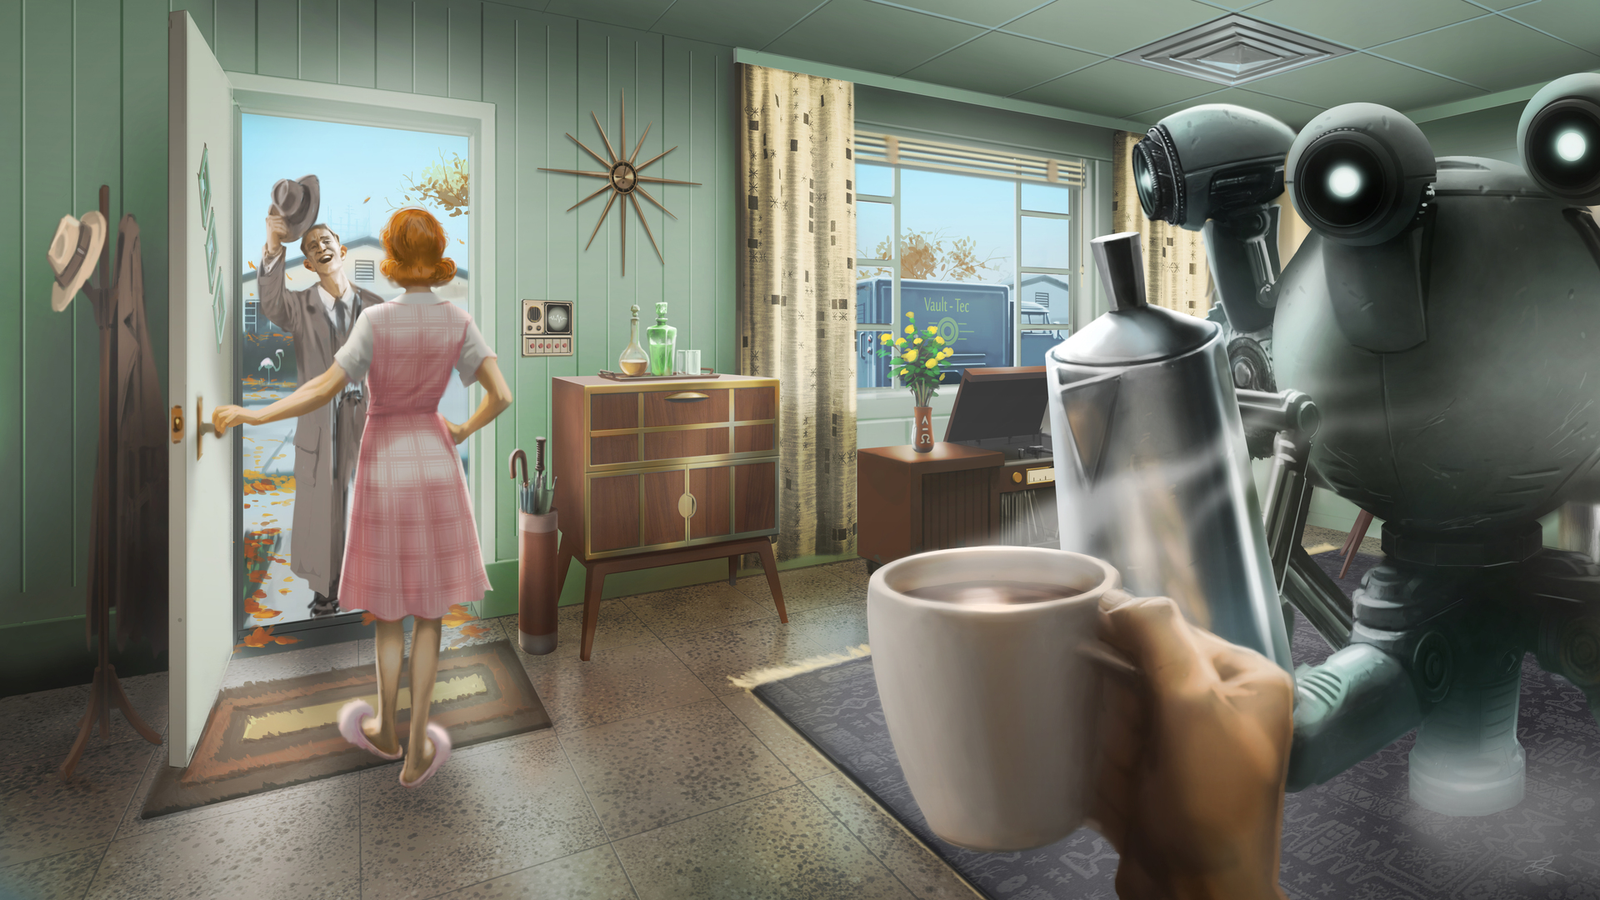 Fallout 4 Steam update mentions and quickly removes New Vegas 2